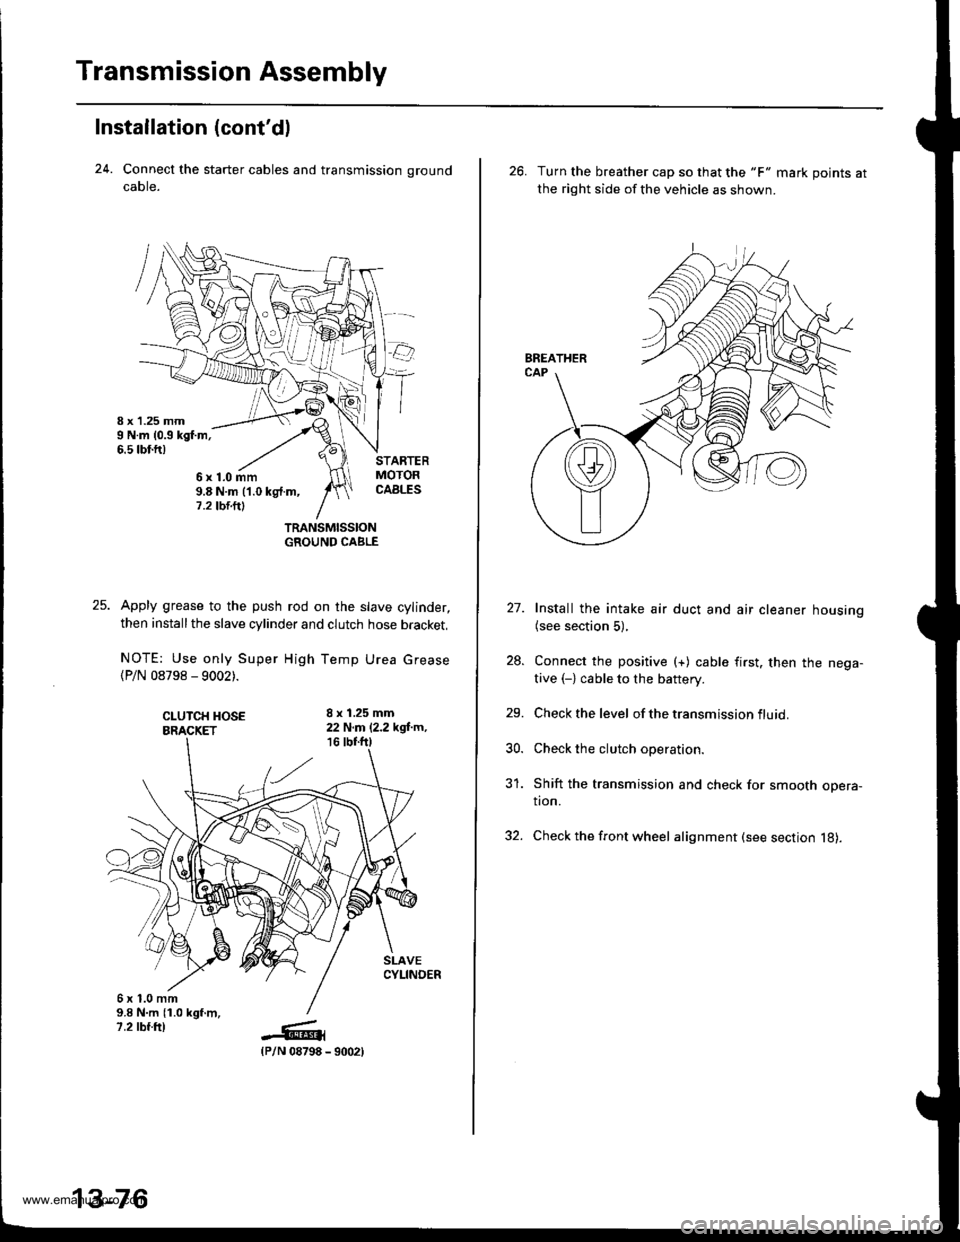 HONDA CR-V 1998 RD1-RD3 / 1.G Service Manual 
Transmission Assembly
Installation (contdl
24. Connect the starter cables and transmission ground
caore.
TRANSMISSIONGROUND CABLE
Apply grease to the push rod on the slave cylinder,
then install the